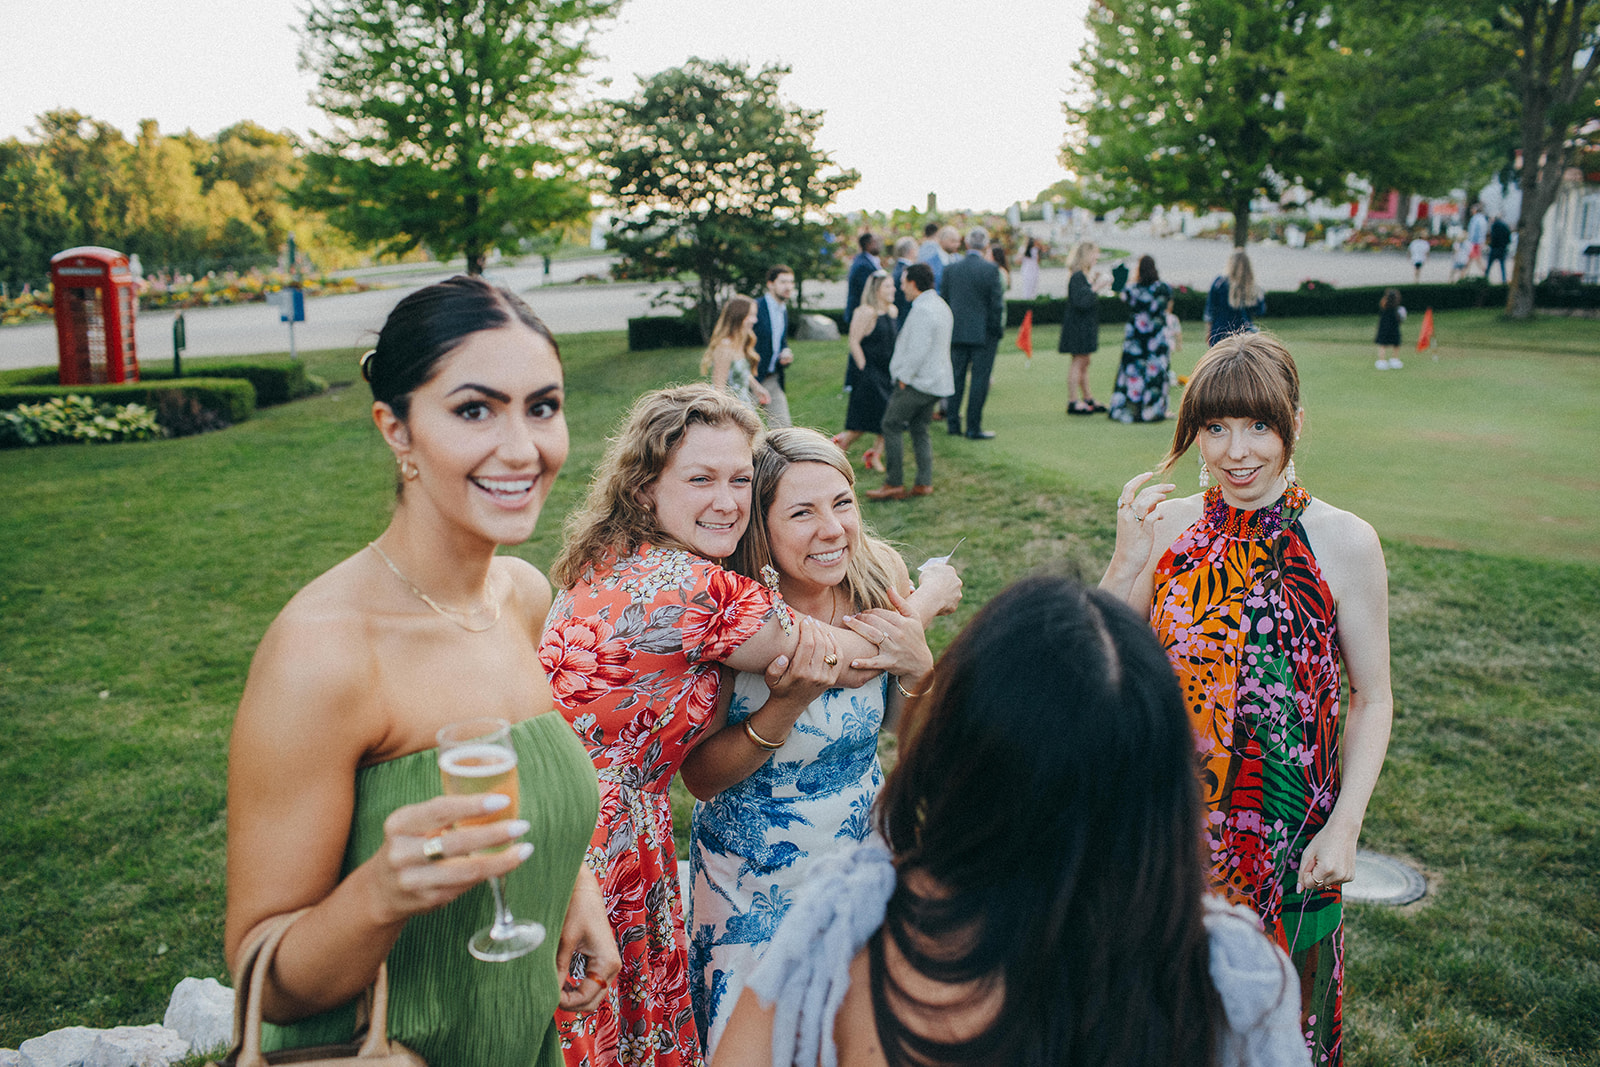 A bride and her friends in colorful dresses for the wedding welcome party at the Jockey Club in the Grand Hotel, MI